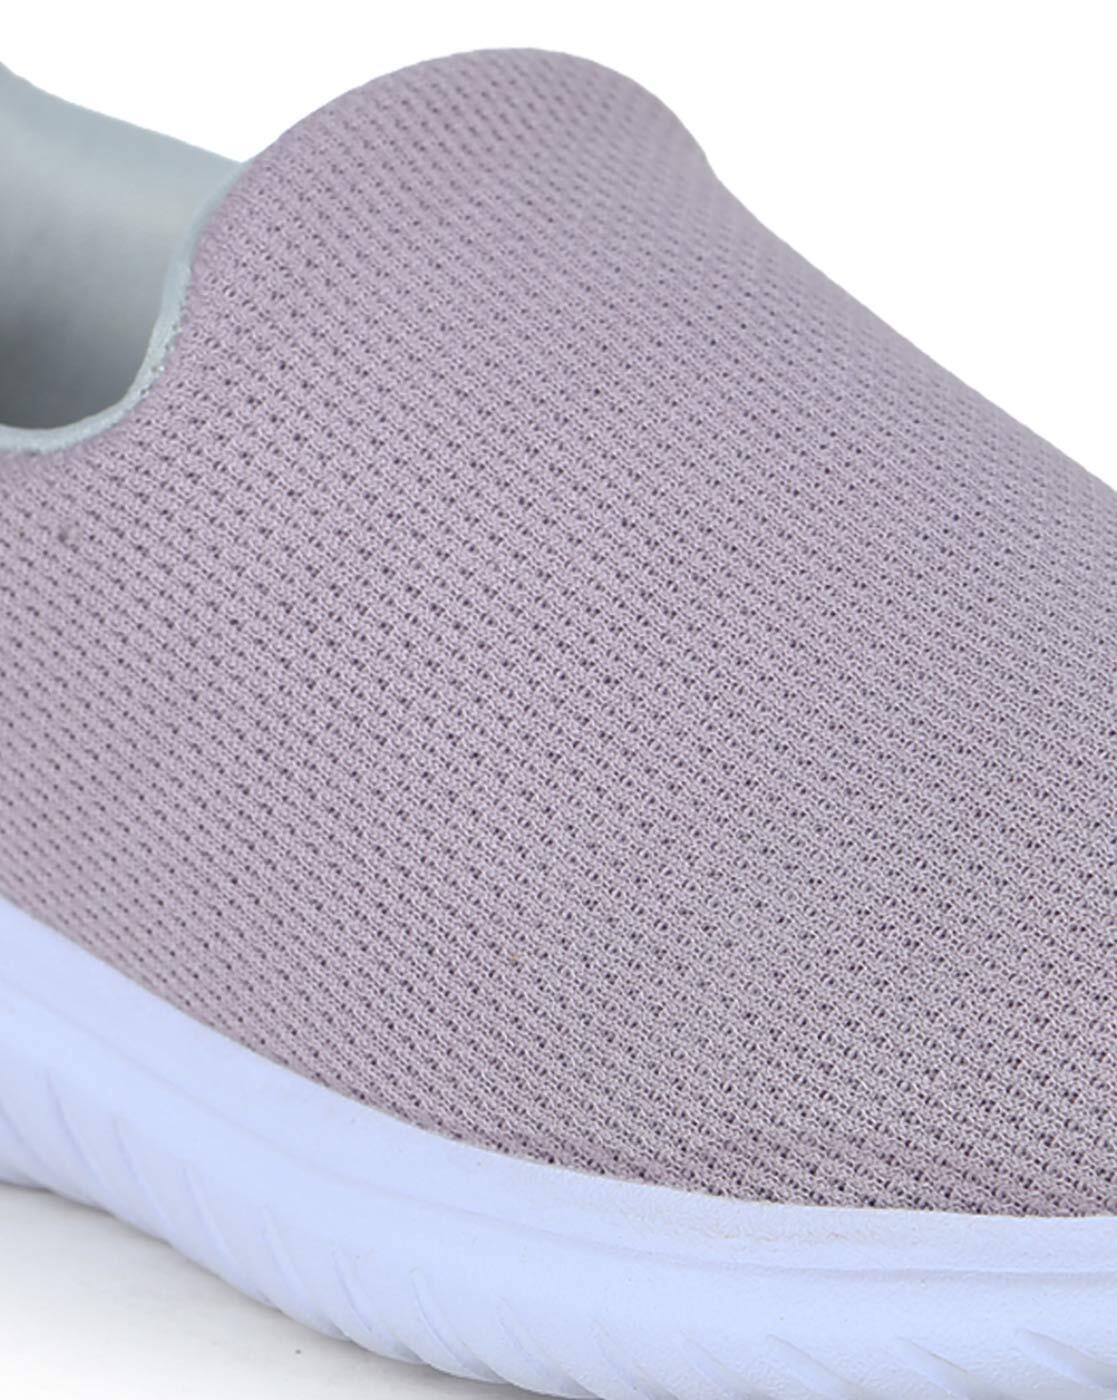 Women's White Slip-On Sneakers & Athletic Shoes | Nordstrom